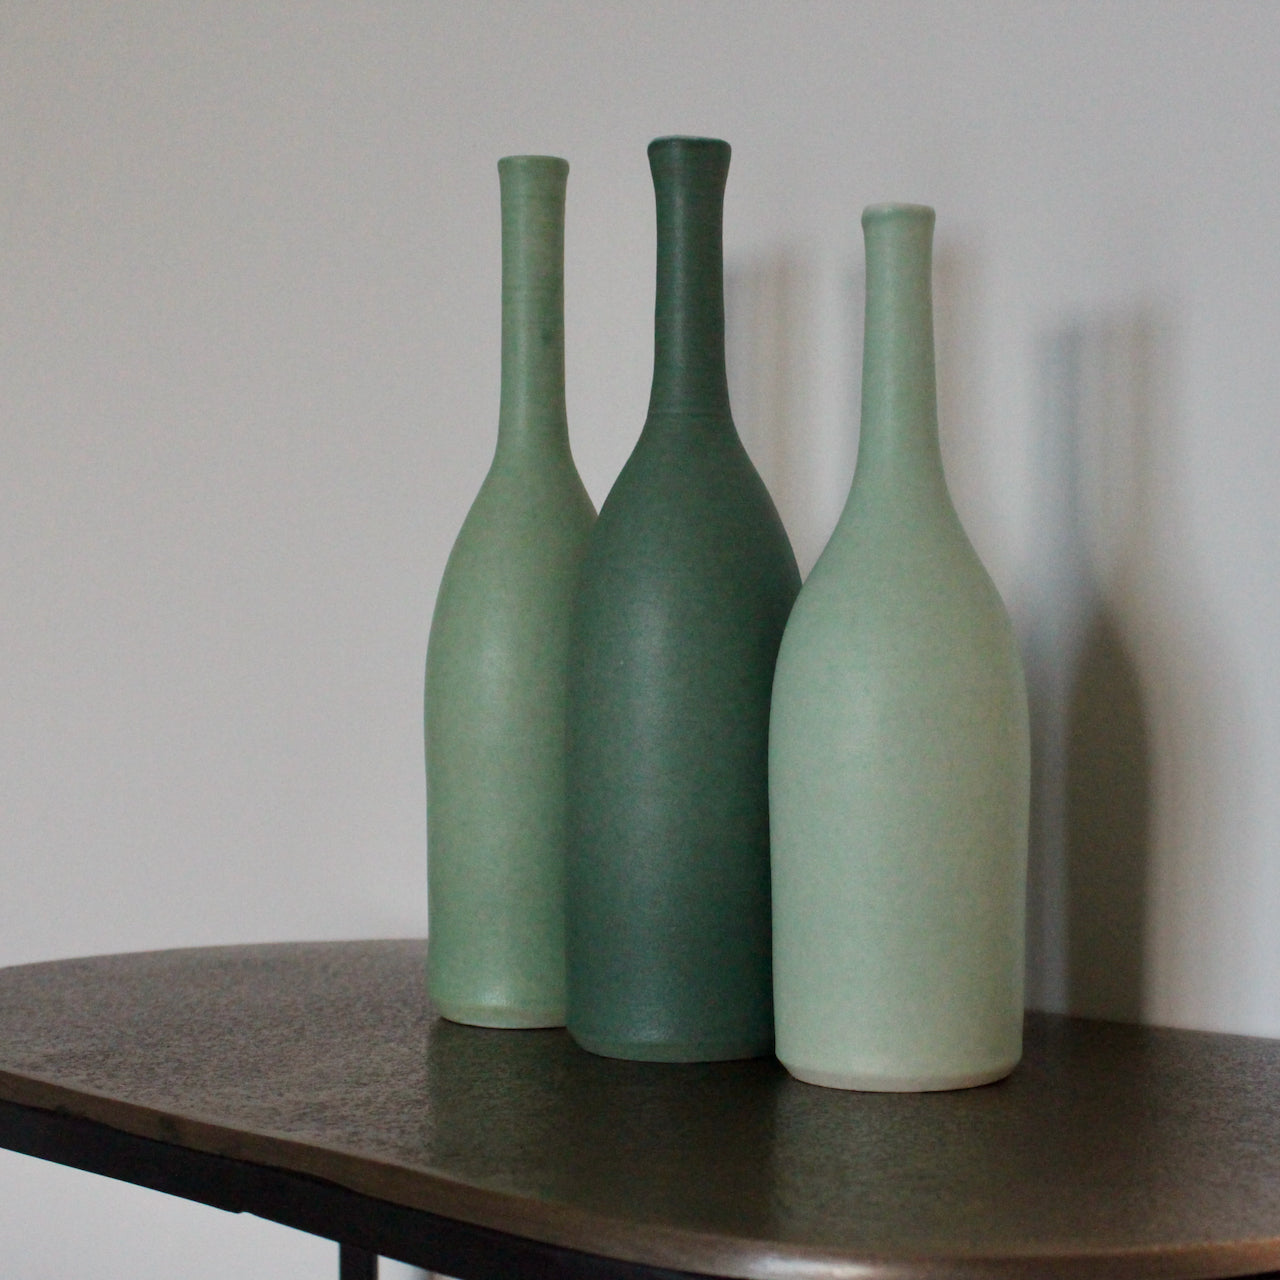 Three ceramic bottles by Lucy Burley in shades of green